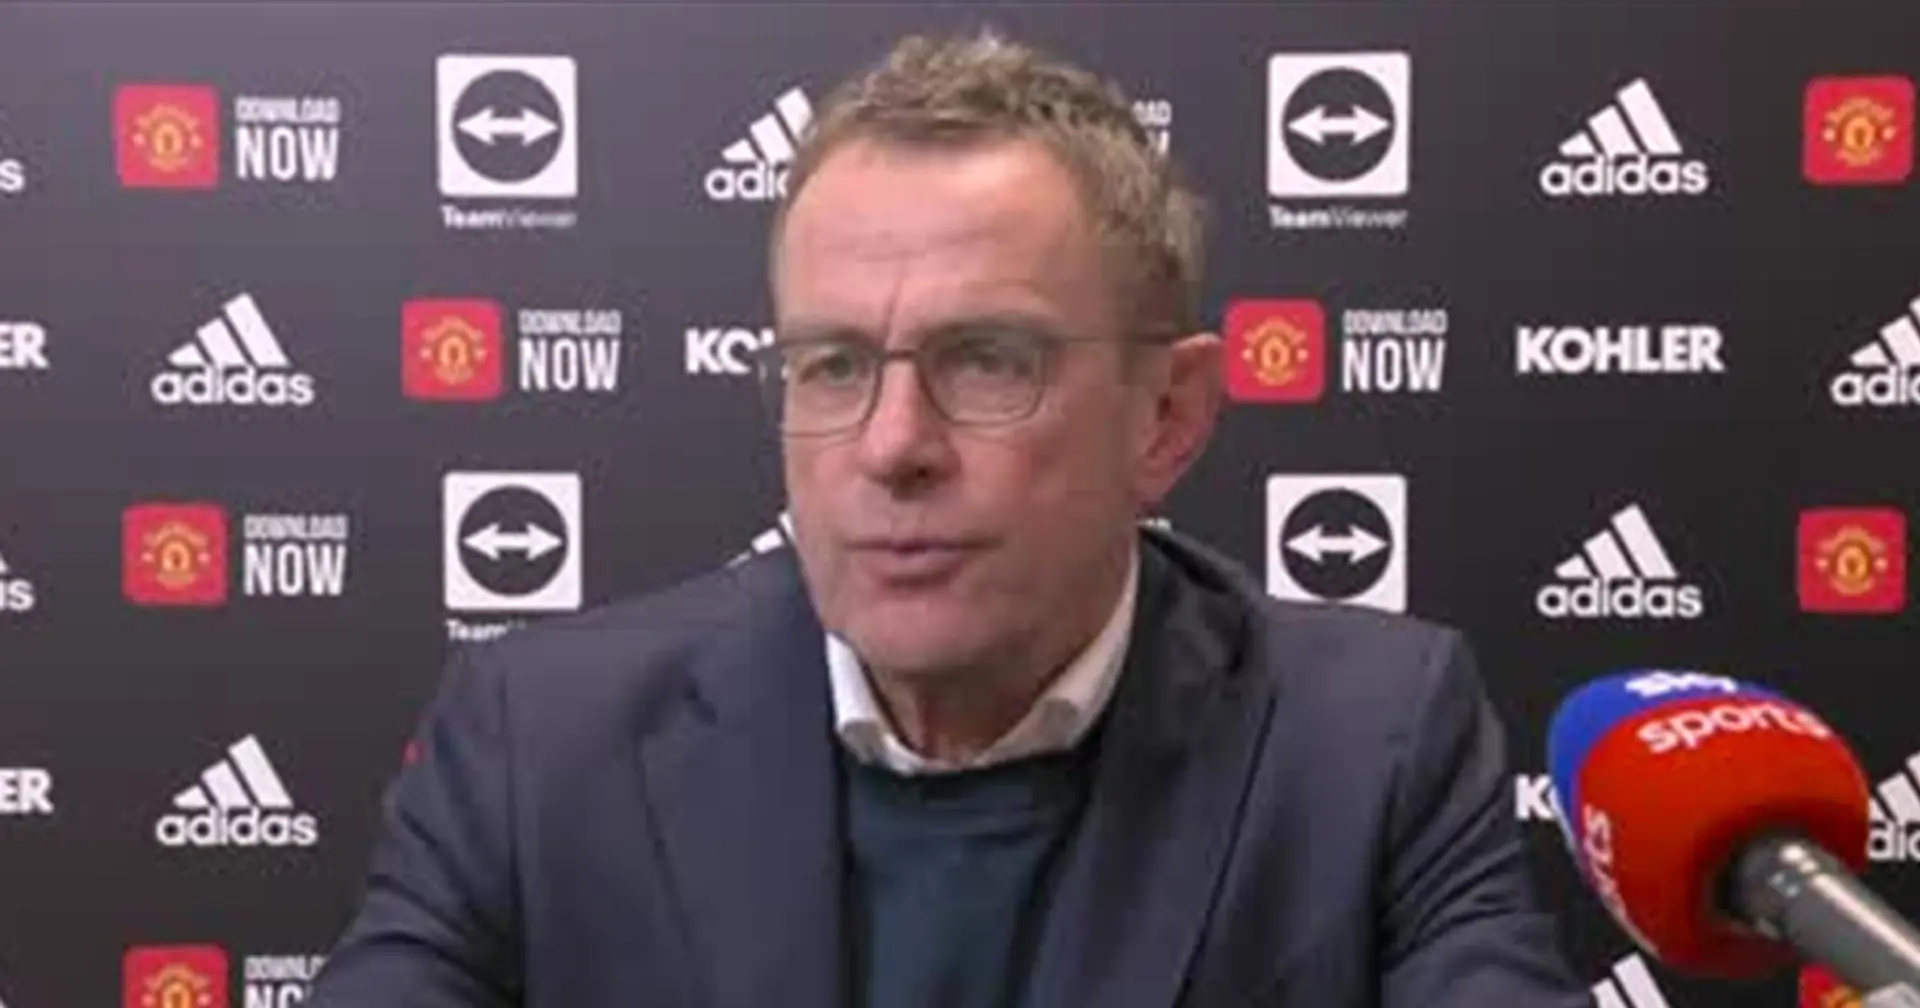 'The situation itself is desperately sad': Ralf Rangnick reacts to Russian invasion of Ukraine